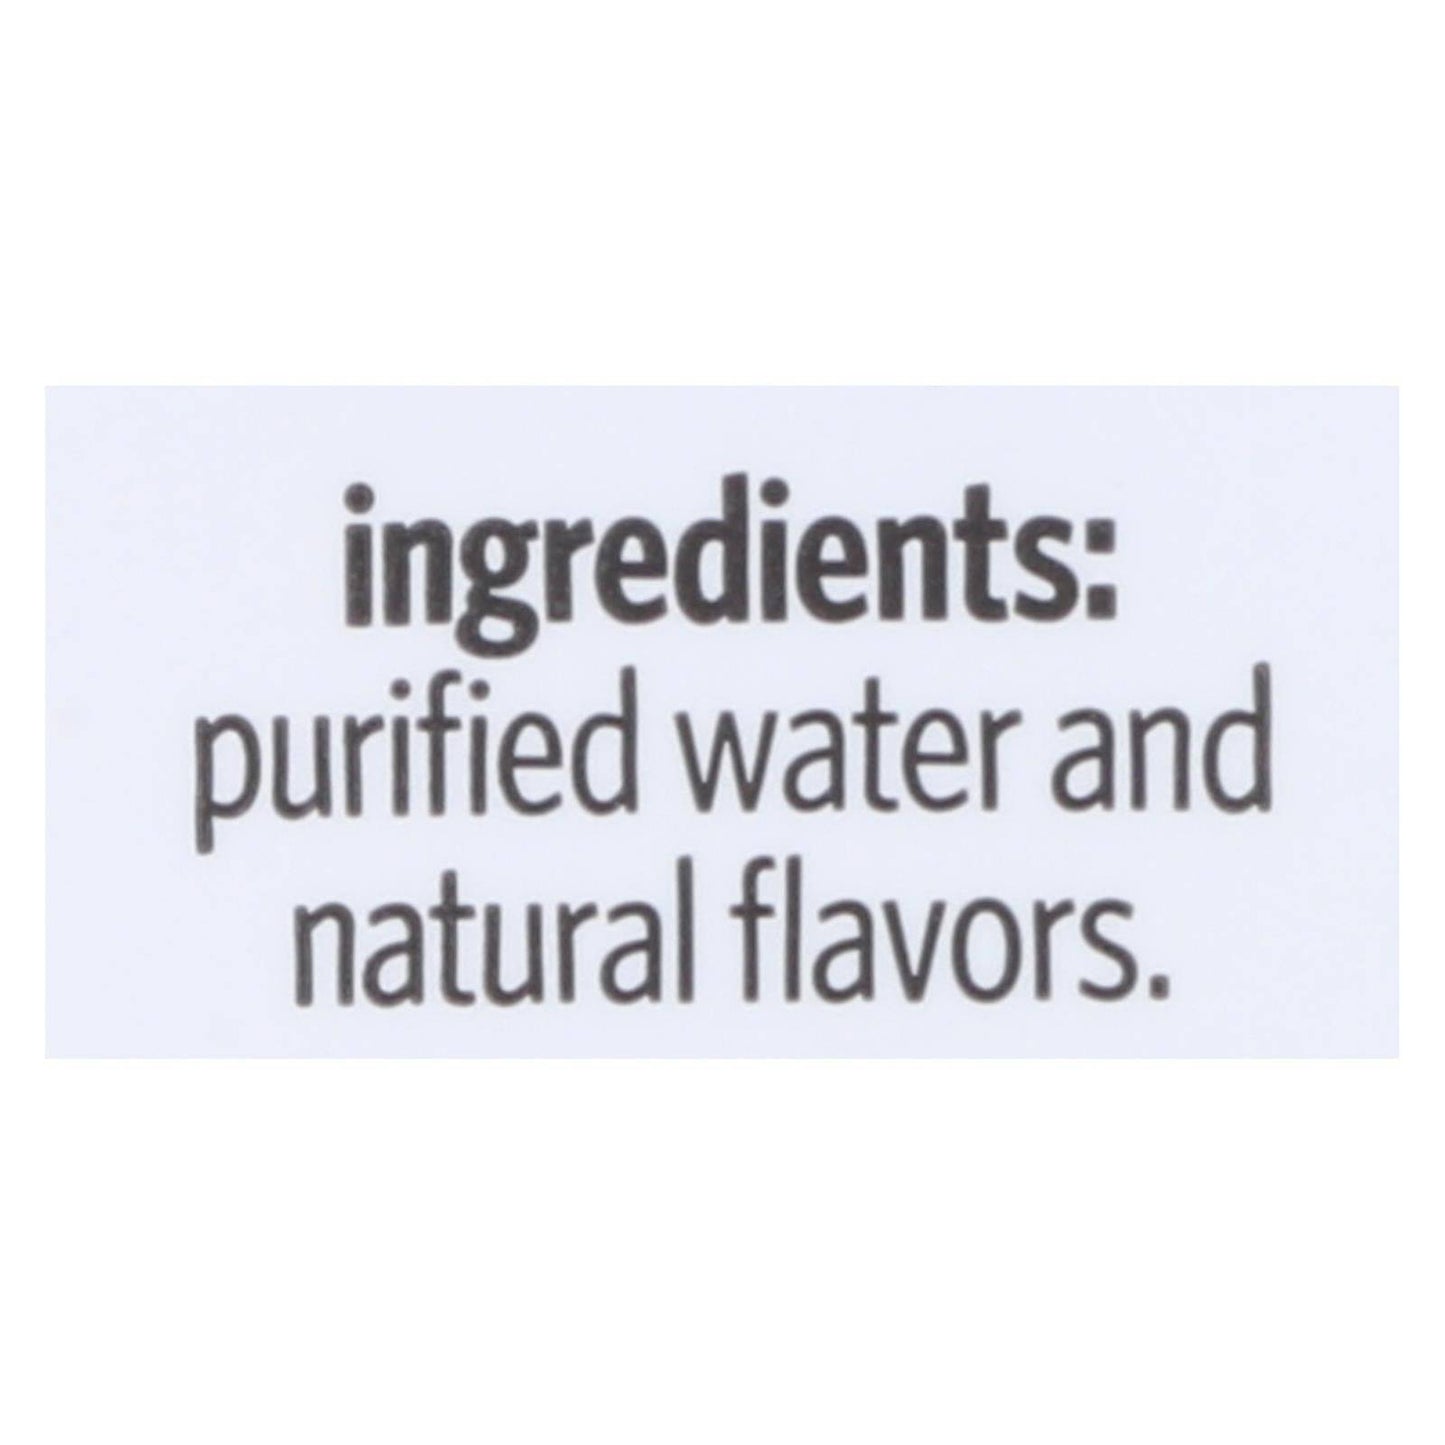 Buy Hint Raspberry Water - Raspberry - Case Of 12 - 16 Fl Oz.  at OnlyNaturals.us